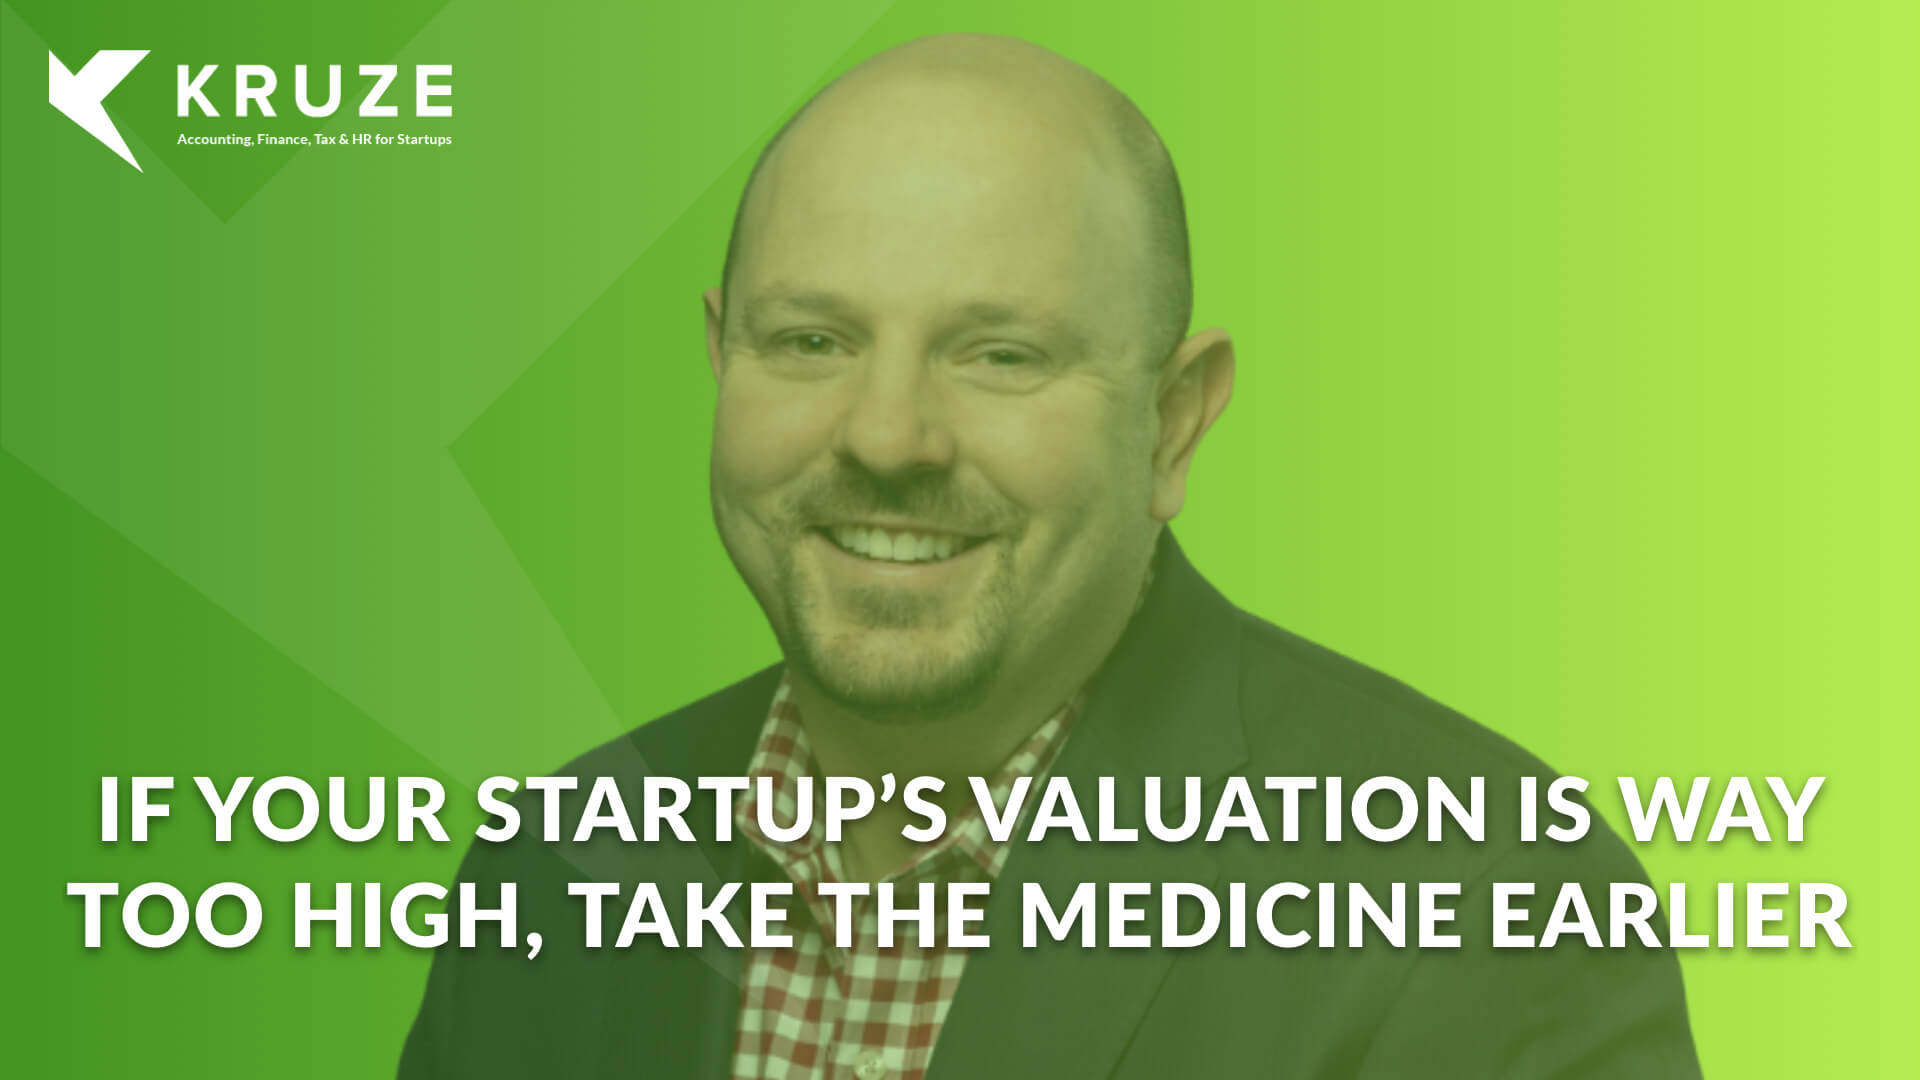 What should you do if your startup’s valuation is too high